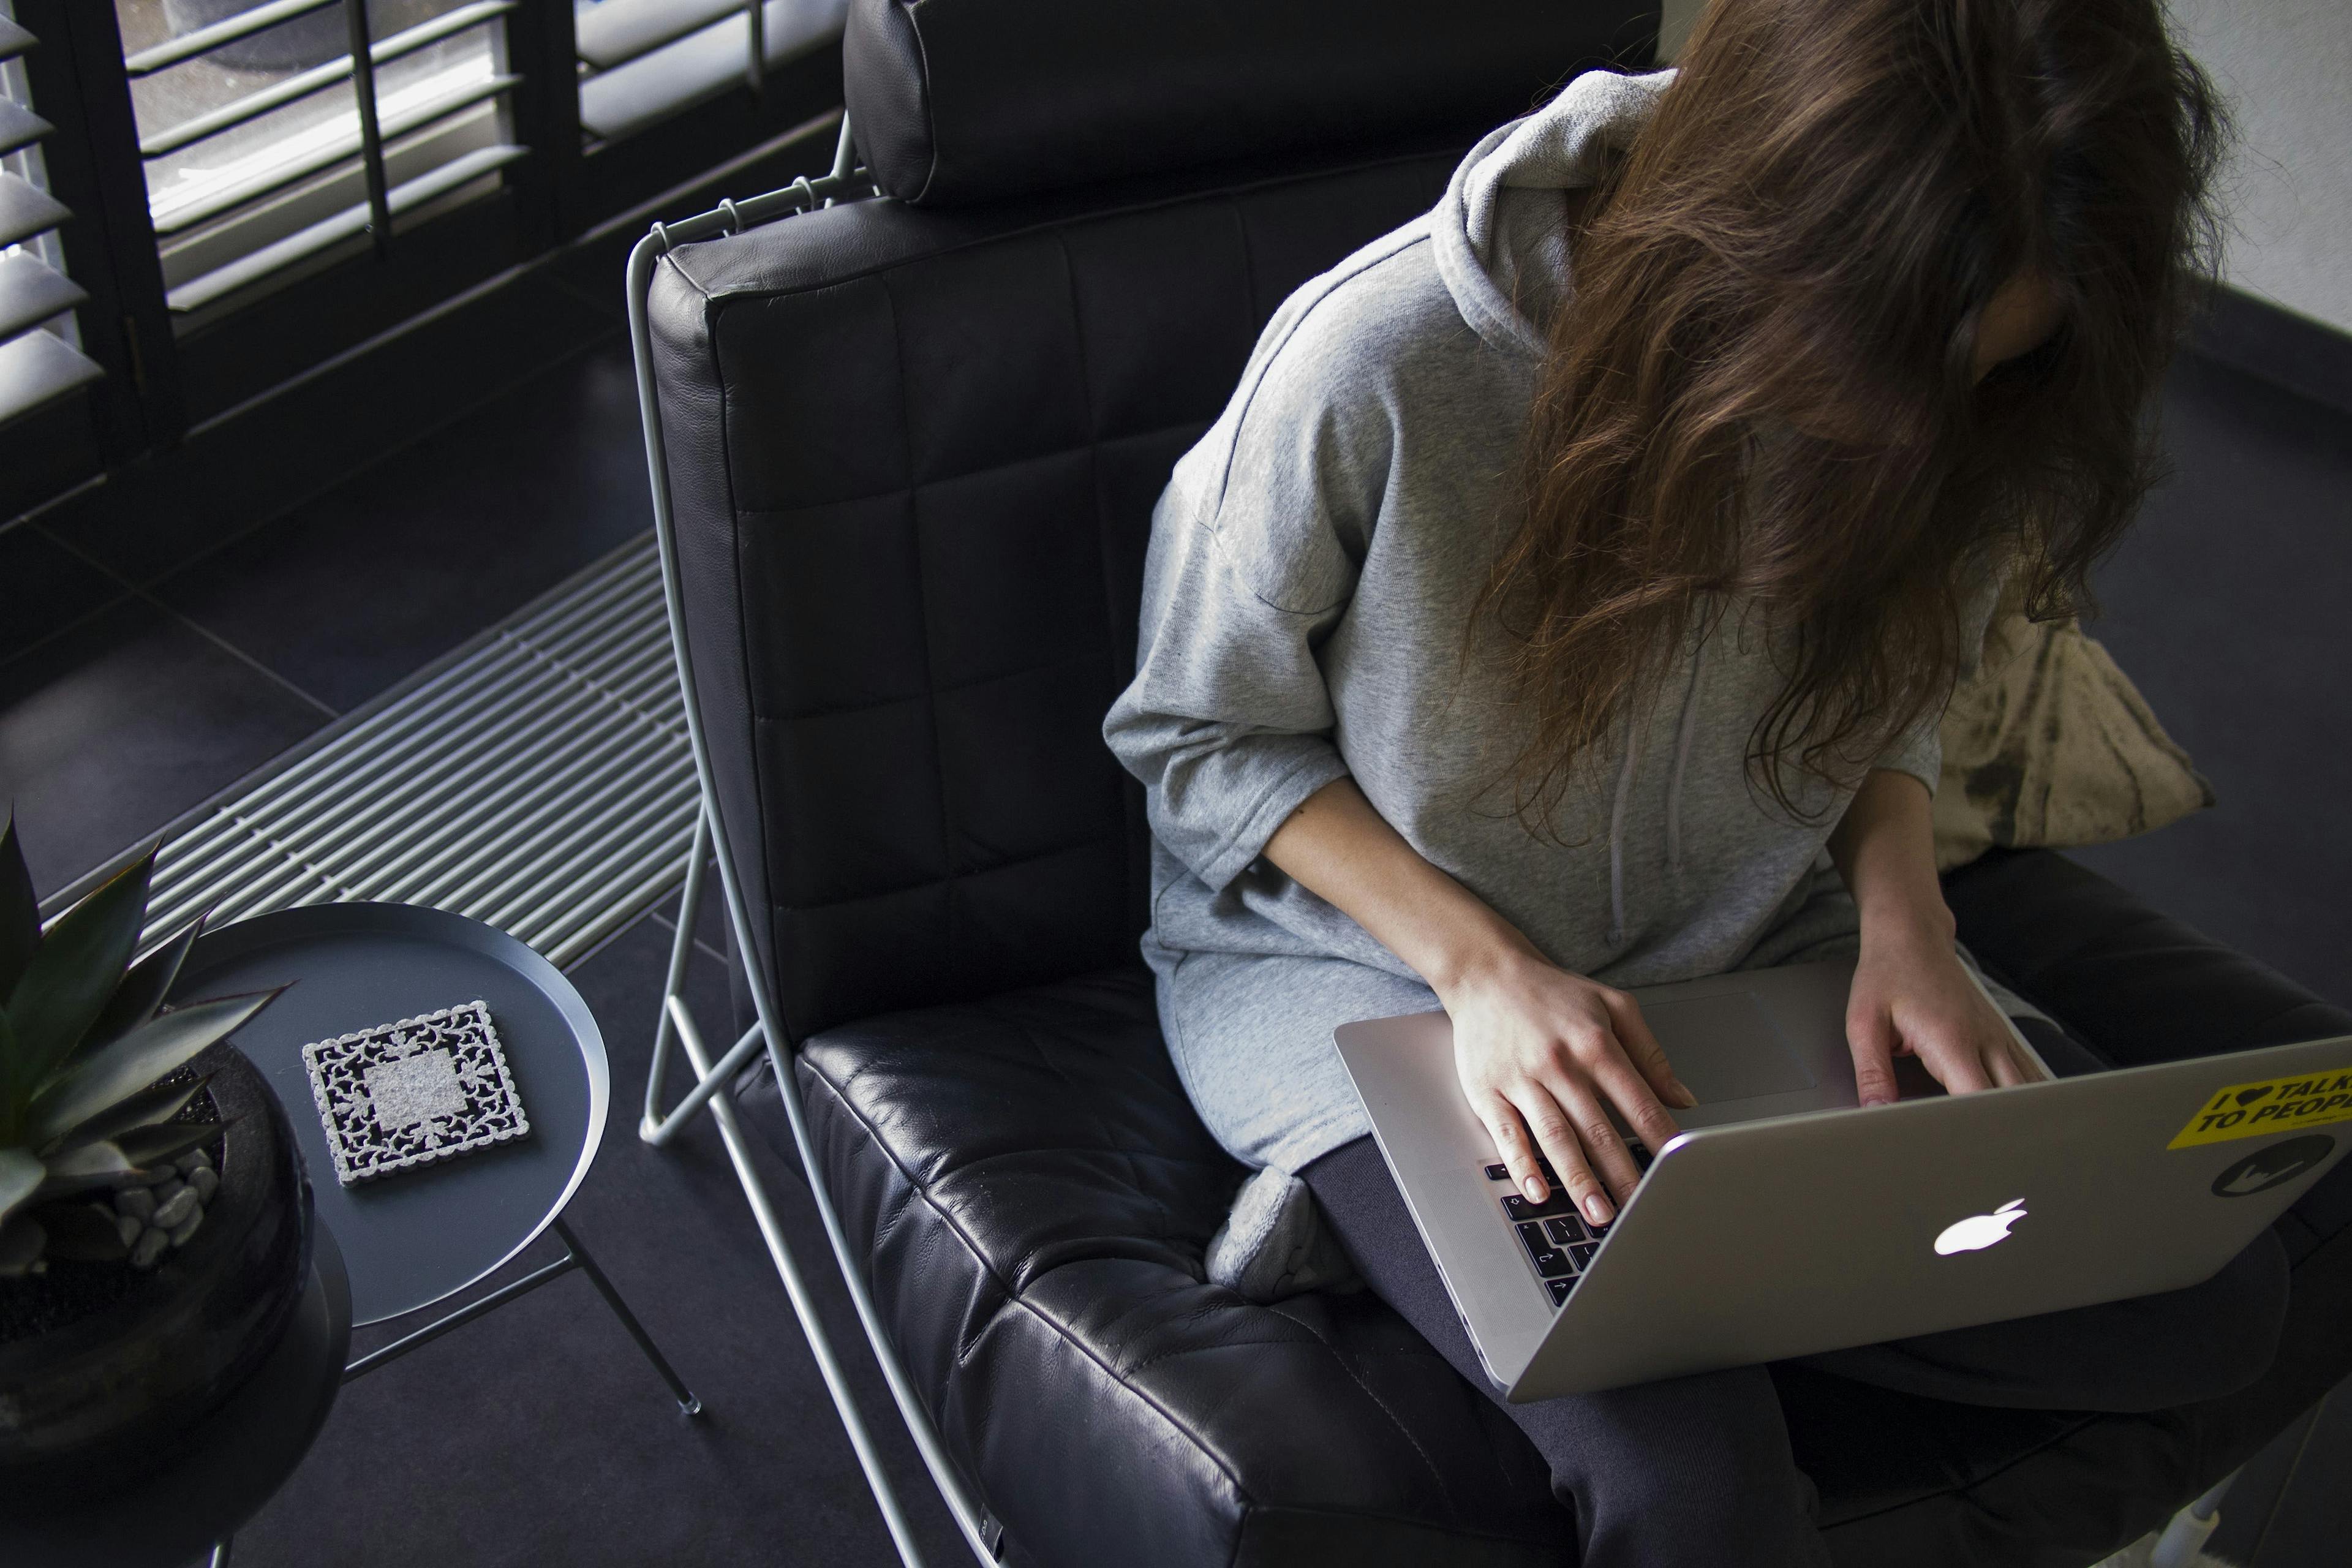 Girl sitting on chair, remote working on laptop